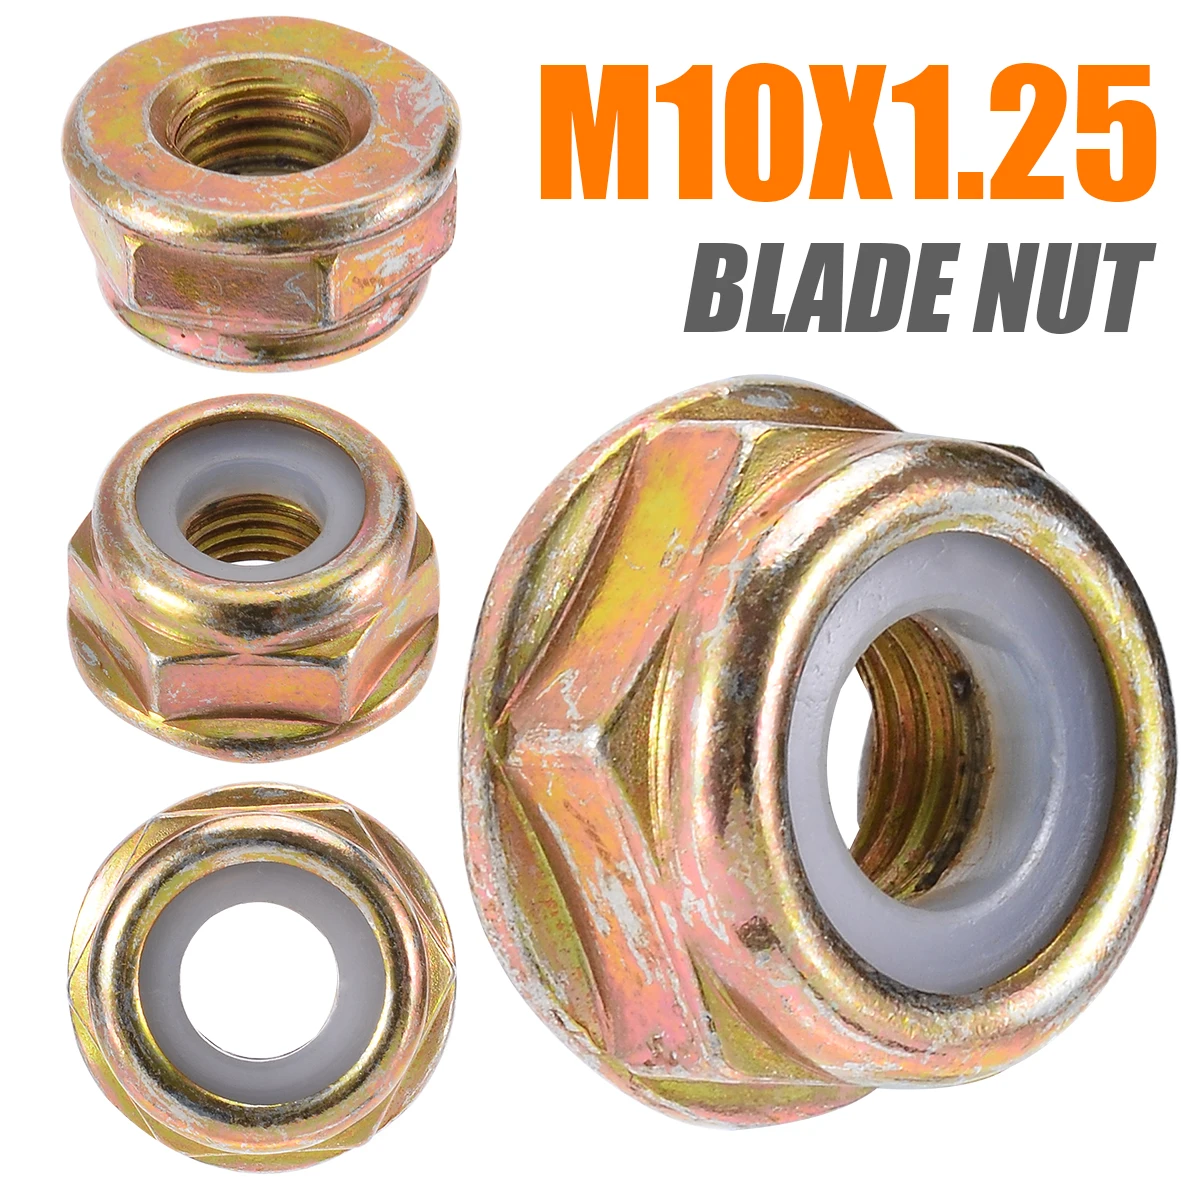 

1Pcs 22mm x 11mm M10x1.25 LH Thread Blade Nut For Various Brush Cutter Strimmer Trimmer Tool parts